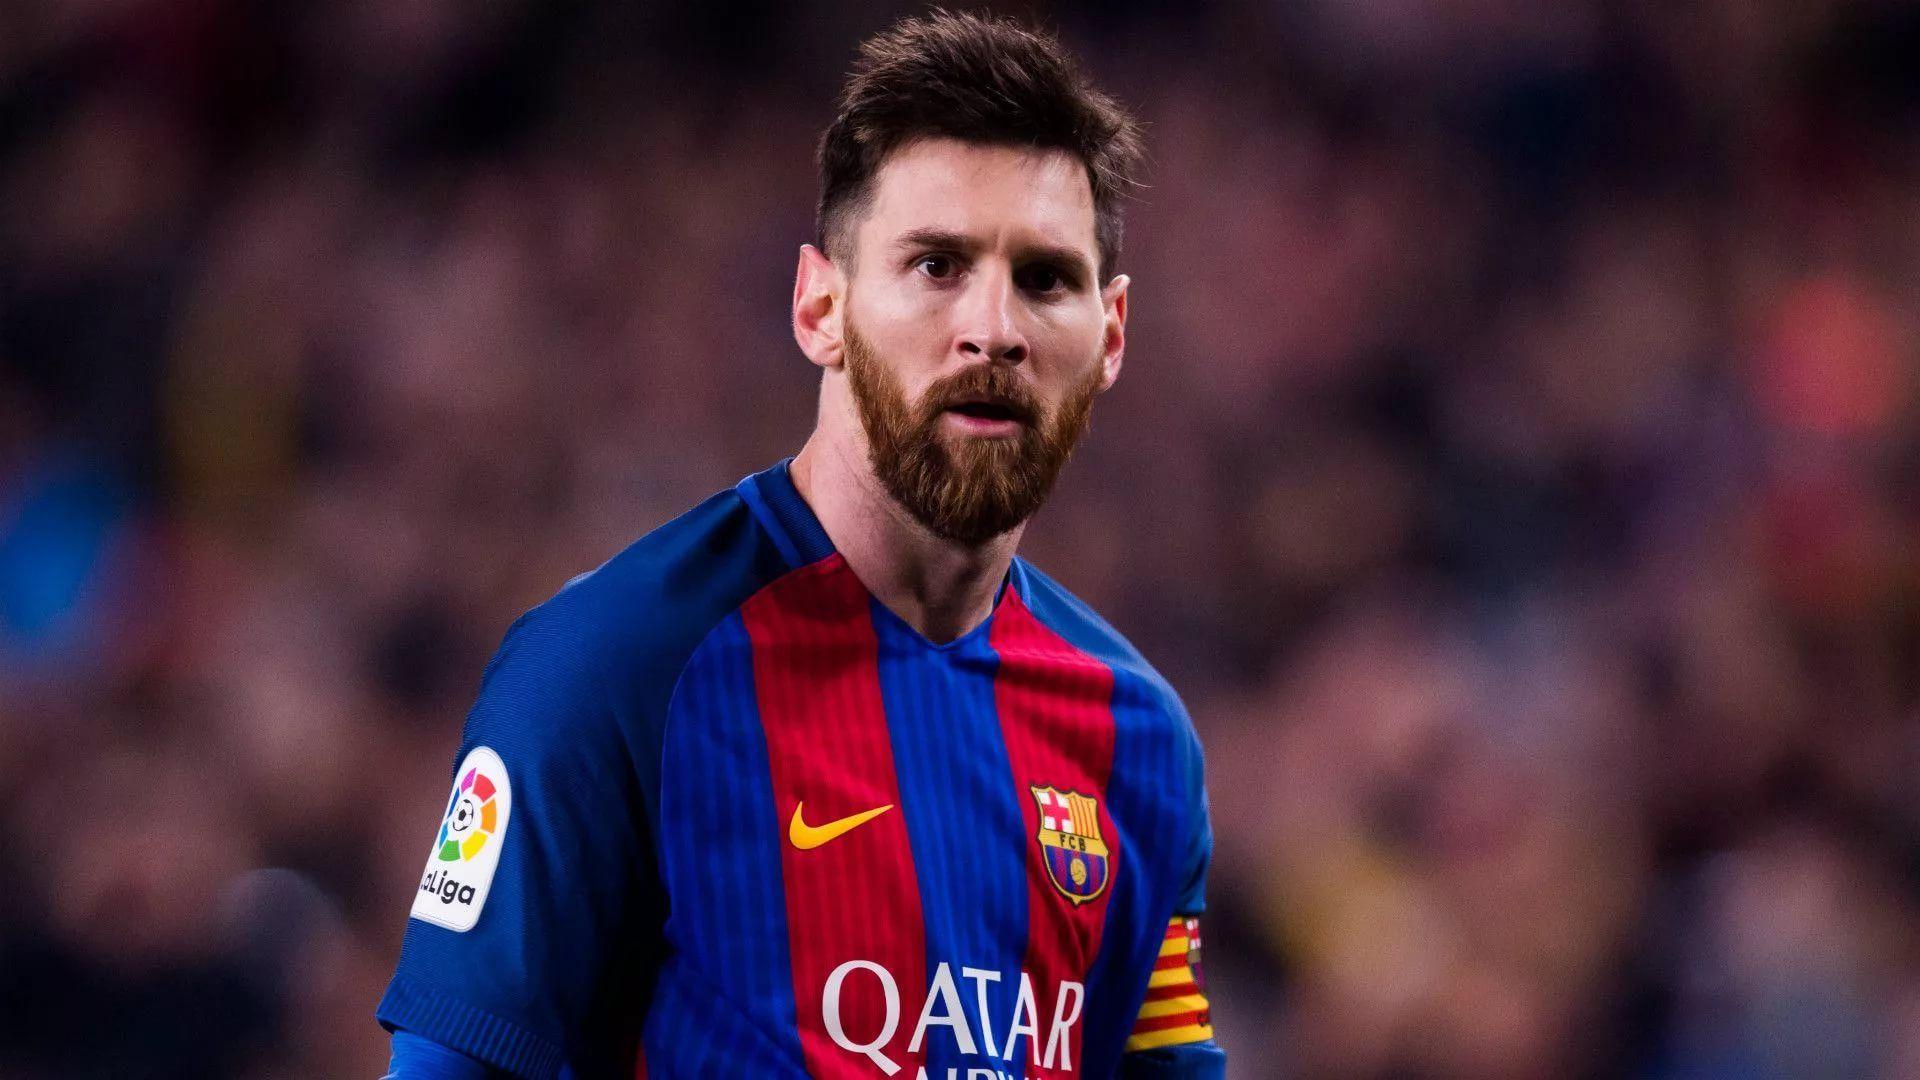 Messi With Beard Wallpapers - Wallpaper Cave